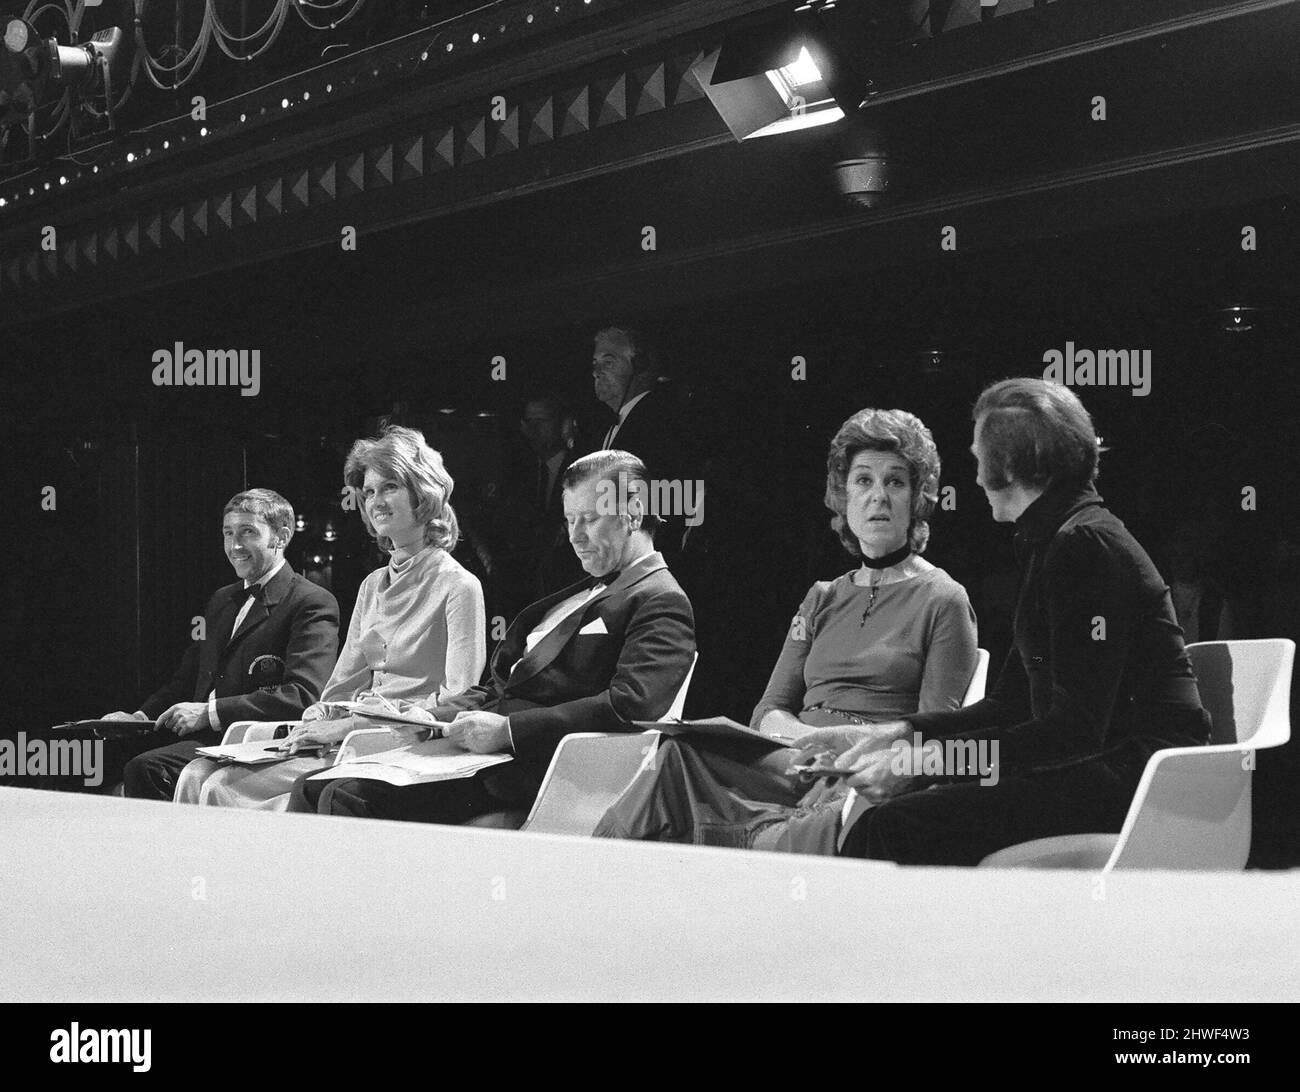 Miss United Kingdom beauty contest at Blackpool. The judges consisting of Felicity Green of the Daily Mirror, Kit van Tullace of Queen magazine, Ron Hill, designer Darnell and Mecca managing director Eric Morley, discuss the contestants. 16th August 1970. Stock Photo